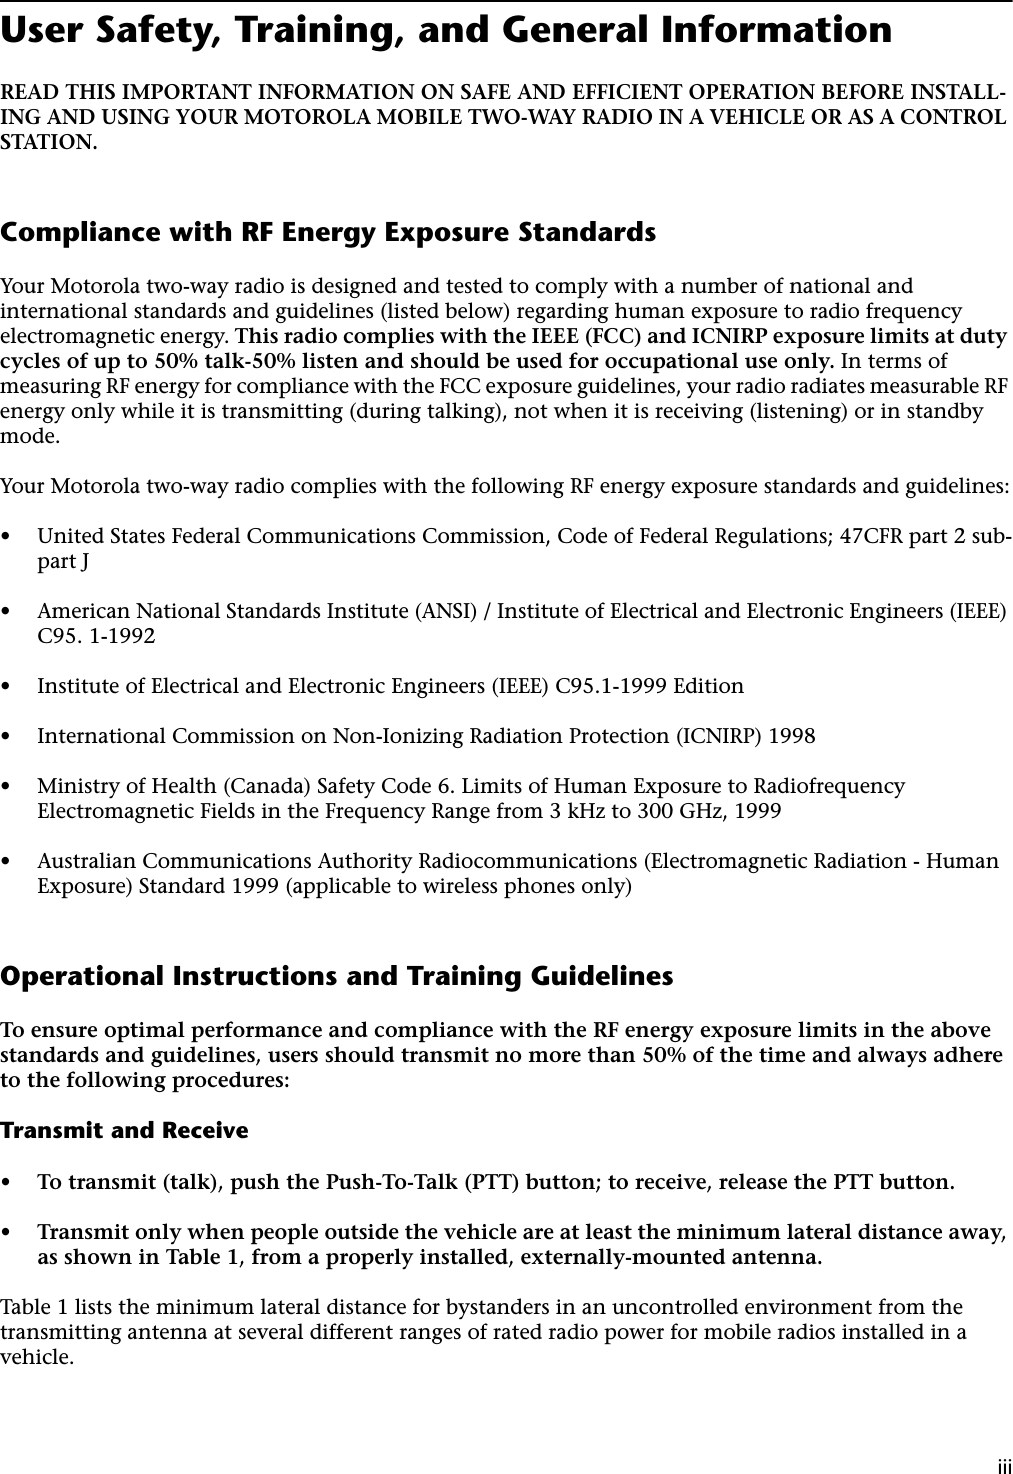  iii User Safety, Training, and General Information READ THIS IMPORTANT INFORMATION ON SAFE AND EFFICIENT OPERATION BEFORE INSTALL-ING AND USING YOUR MOTOROLA MOBILE TWO-WAY RADIO IN A VEHICLE OR AS A CONTROL STATION. Compliance with RF Energy Exposure Standards Your Motorola two-way radio is designed and tested to comply with a number of national and international standards and guidelines (listed below) regarding human exposure to radio frequency electromagnetic energy.  This radio complies with the IEEE (FCC) and ICNIRP exposure limits at duty cycles of up to 50% talk-50% listen and should be used for occupational use only.  In terms of measuring RF energy for compliance with the FCC exposure guidelines, your radio radiates measurable RF energy only while it is transmitting (during talking), not when it is receiving (listening) or in standby mode.Your Motorola two-way radio complies with the following RF energy exposure standards and guidelines: • United States Federal Communications Commission, Code of Federal Regulations; 47CFR part 2 sub-part J • American National Standards Institute (ANSI) / Institute of Electrical and Electronic Engineers (IEEE) C95. 1-1992 • Institute of Electrical and Electronic Engineers (IEEE) C95.1-1999 Edition • International Commission on Non-Ionizing Radiation Protection (ICNIRP) 1998 • Ministry of Health (Canada) Safety Code 6. Limits of Human Exposure to Radiofrequency Electromagnetic Fields in the Frequency Range from 3 kHz to 300 GHz, 1999 • Australian Communications Authority Radiocommunications (Electromagnetic Radiation - Human Exposure) Standard 1999 (applicable to wireless phones only) Operational Instructions and Training Guidelines To ensure optimal performance and compliance with the RF energy exposure limits in the above standards and guidelines, users should transmit no more than 50% of the time and always adhere to the following procedures: Transmit and Receive • To transmit (talk), push the Push-To-Talk (PTT) button; to receive, release the PTT button. • Transmit only when people outside the vehicle are at least the minimum lateral distance away, as shown in Table 1, from a properly installed, externally-mounted antenna. Table 1 lists the minimum lateral distance for bystanders in an uncontrolled environment from the transmitting antenna at several different ranges of rated radio power for mobile radios installed in a vehicle.